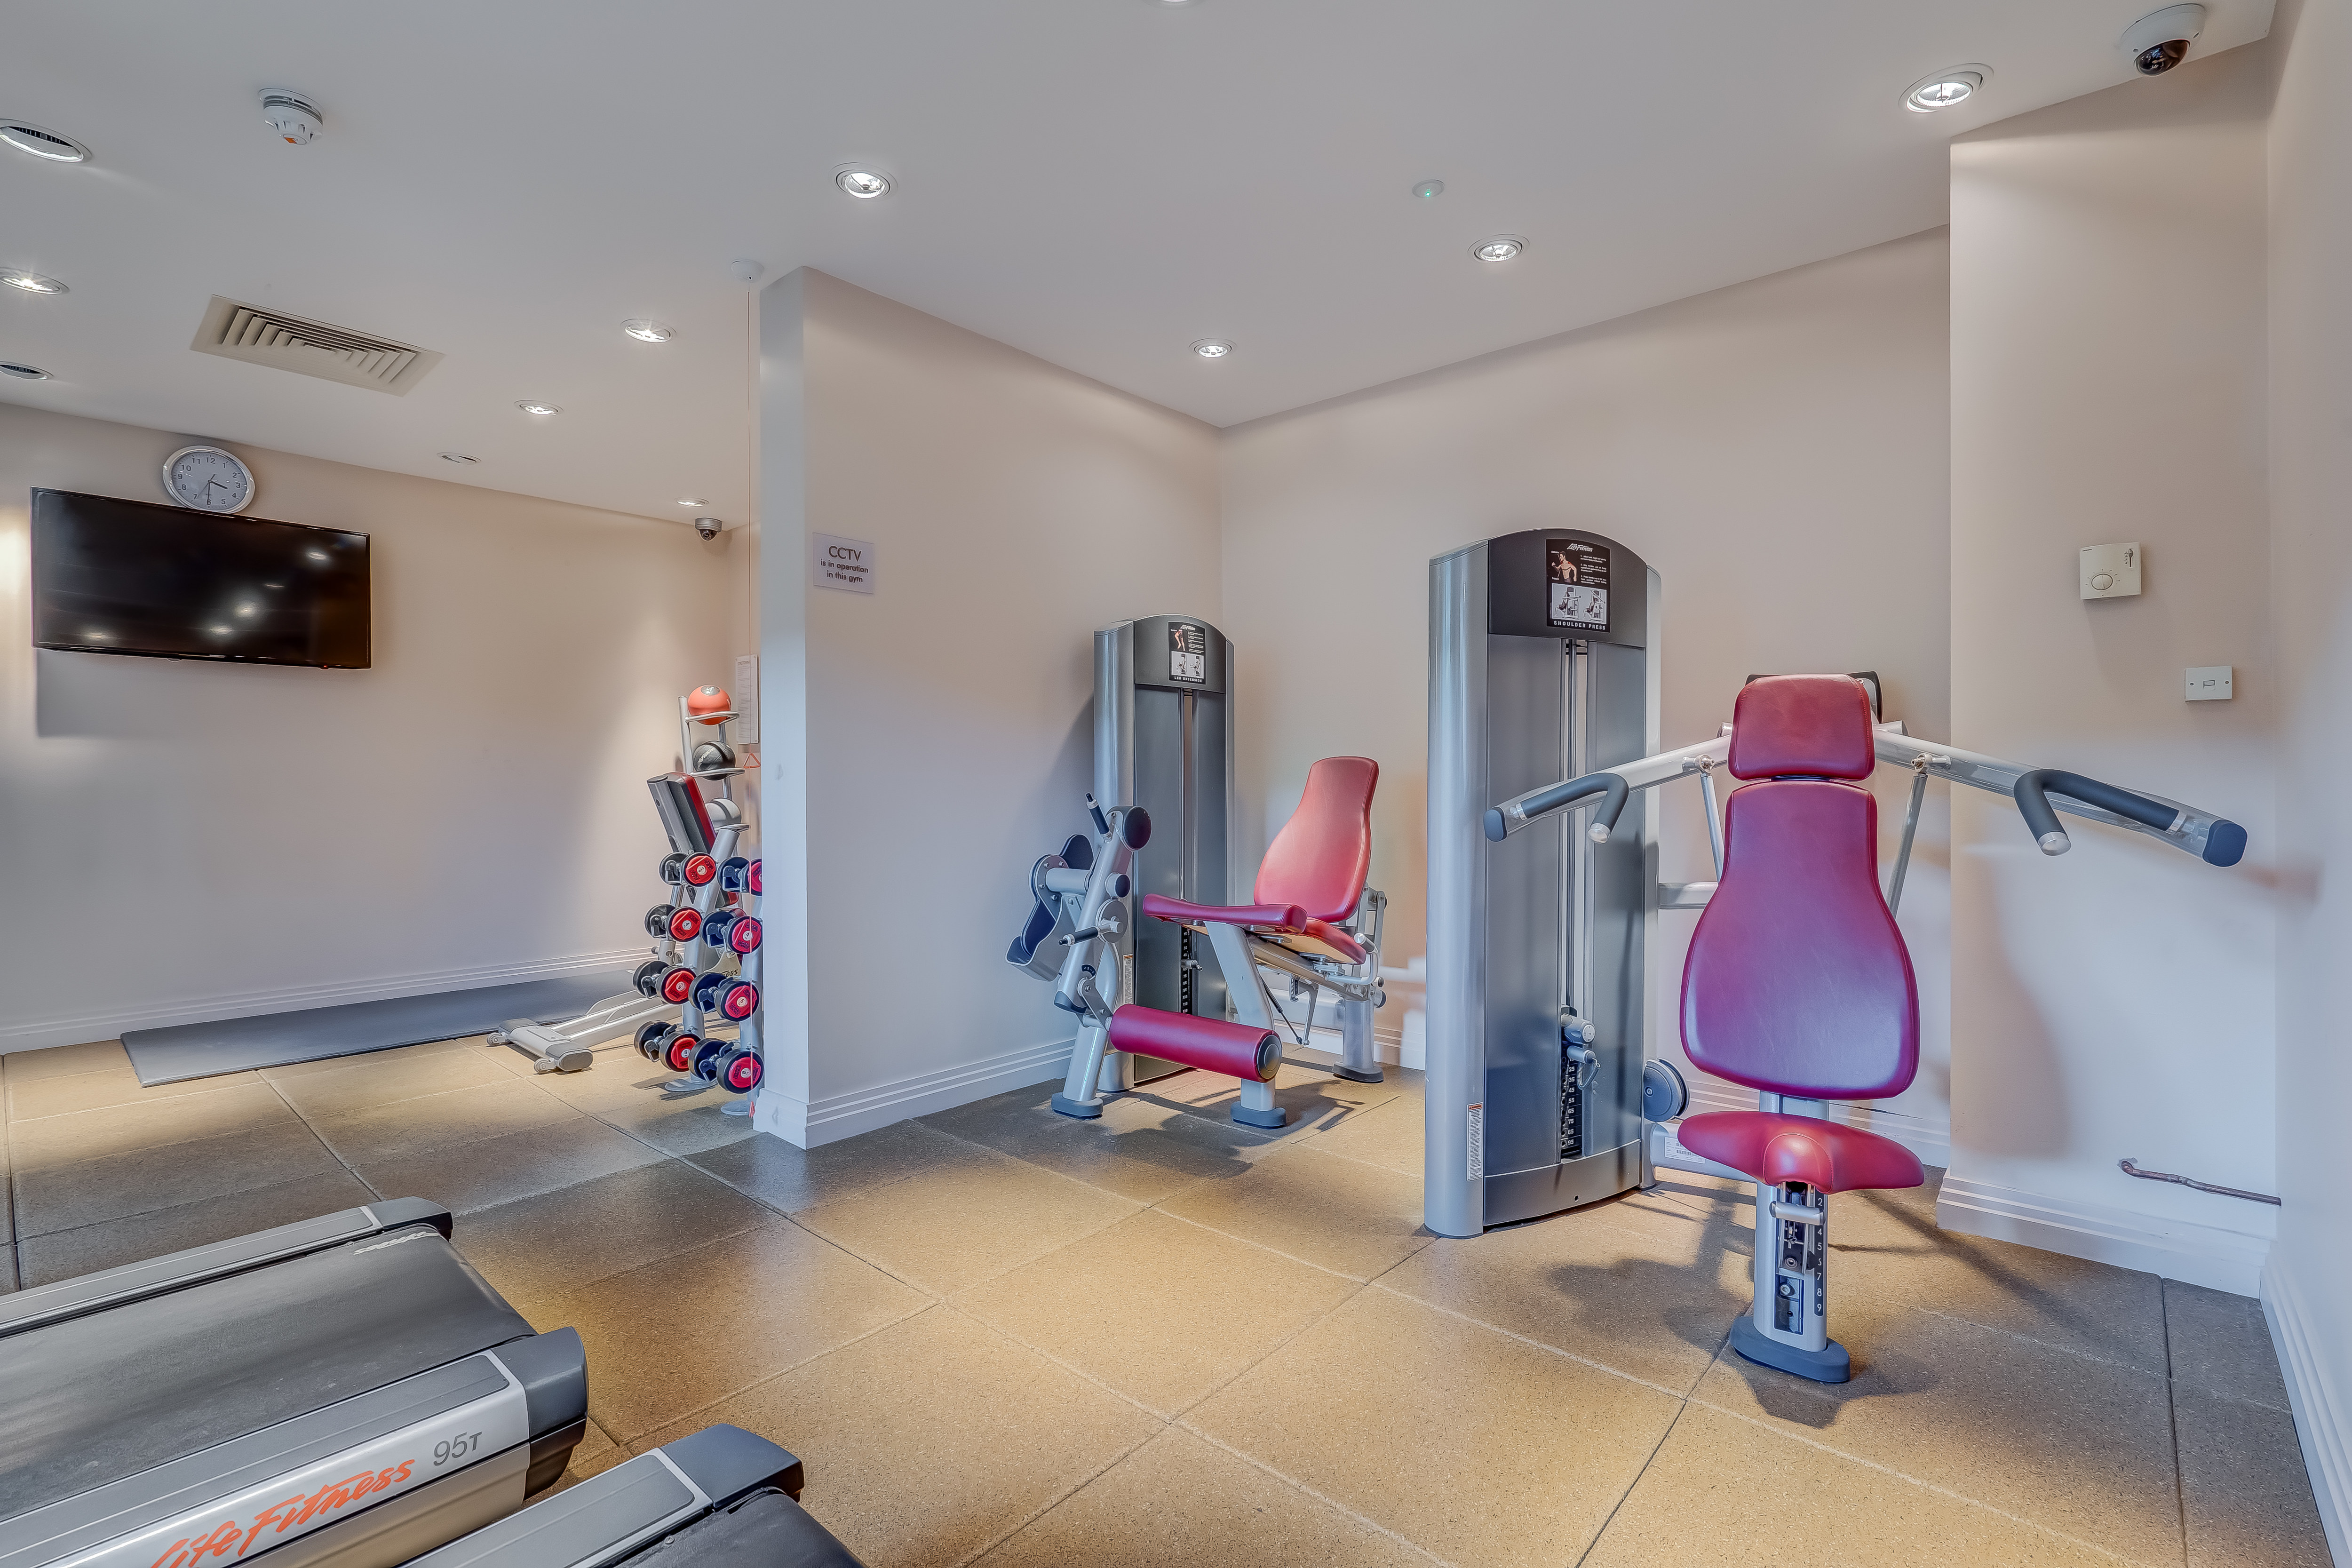 Fitness Center Workout Area with TV